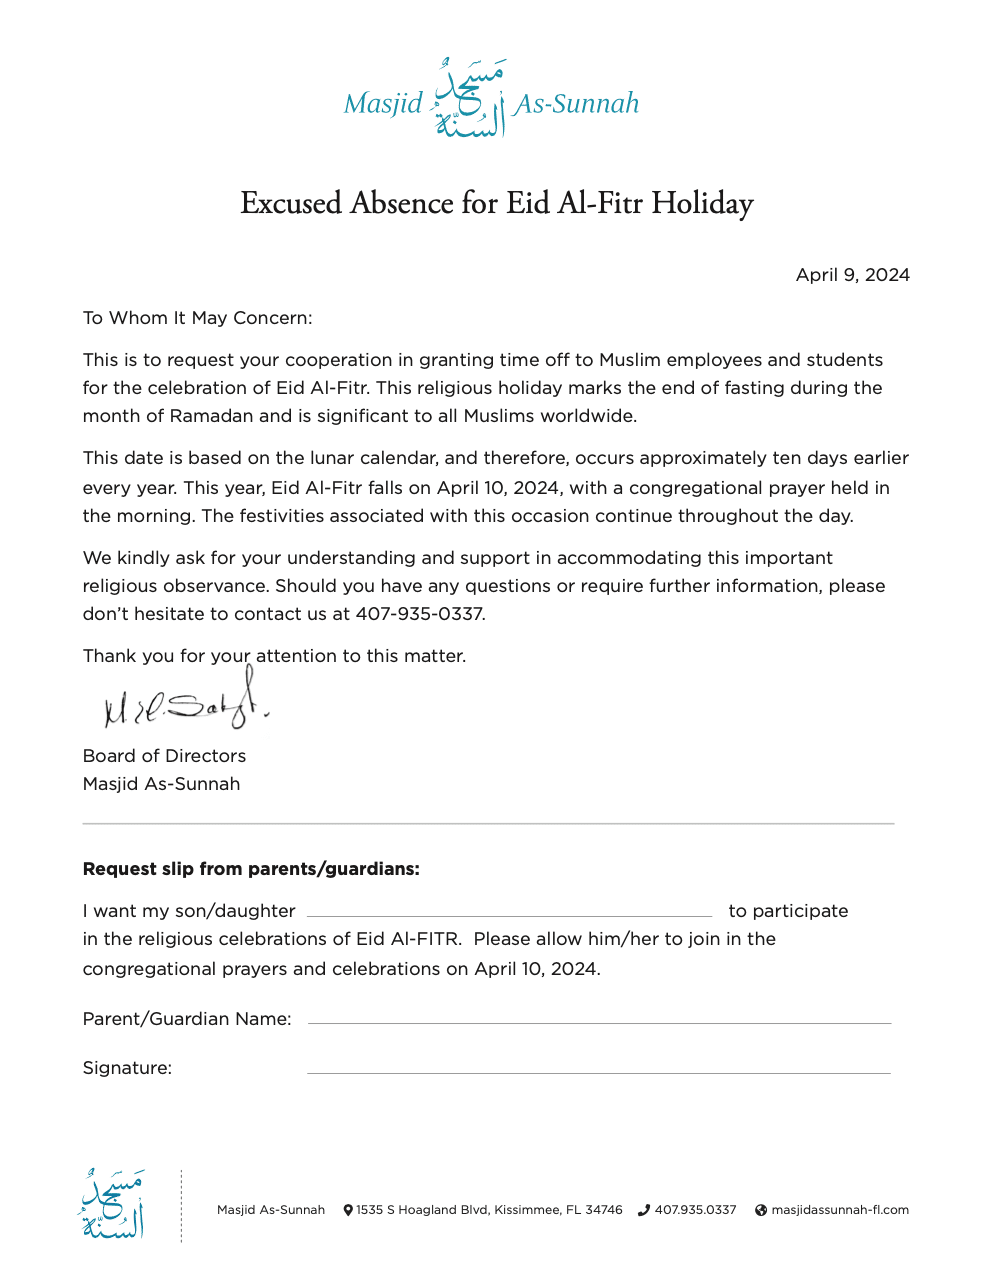 Do You Need Eid Excuse Letter For Your Employer or School? Masjid As